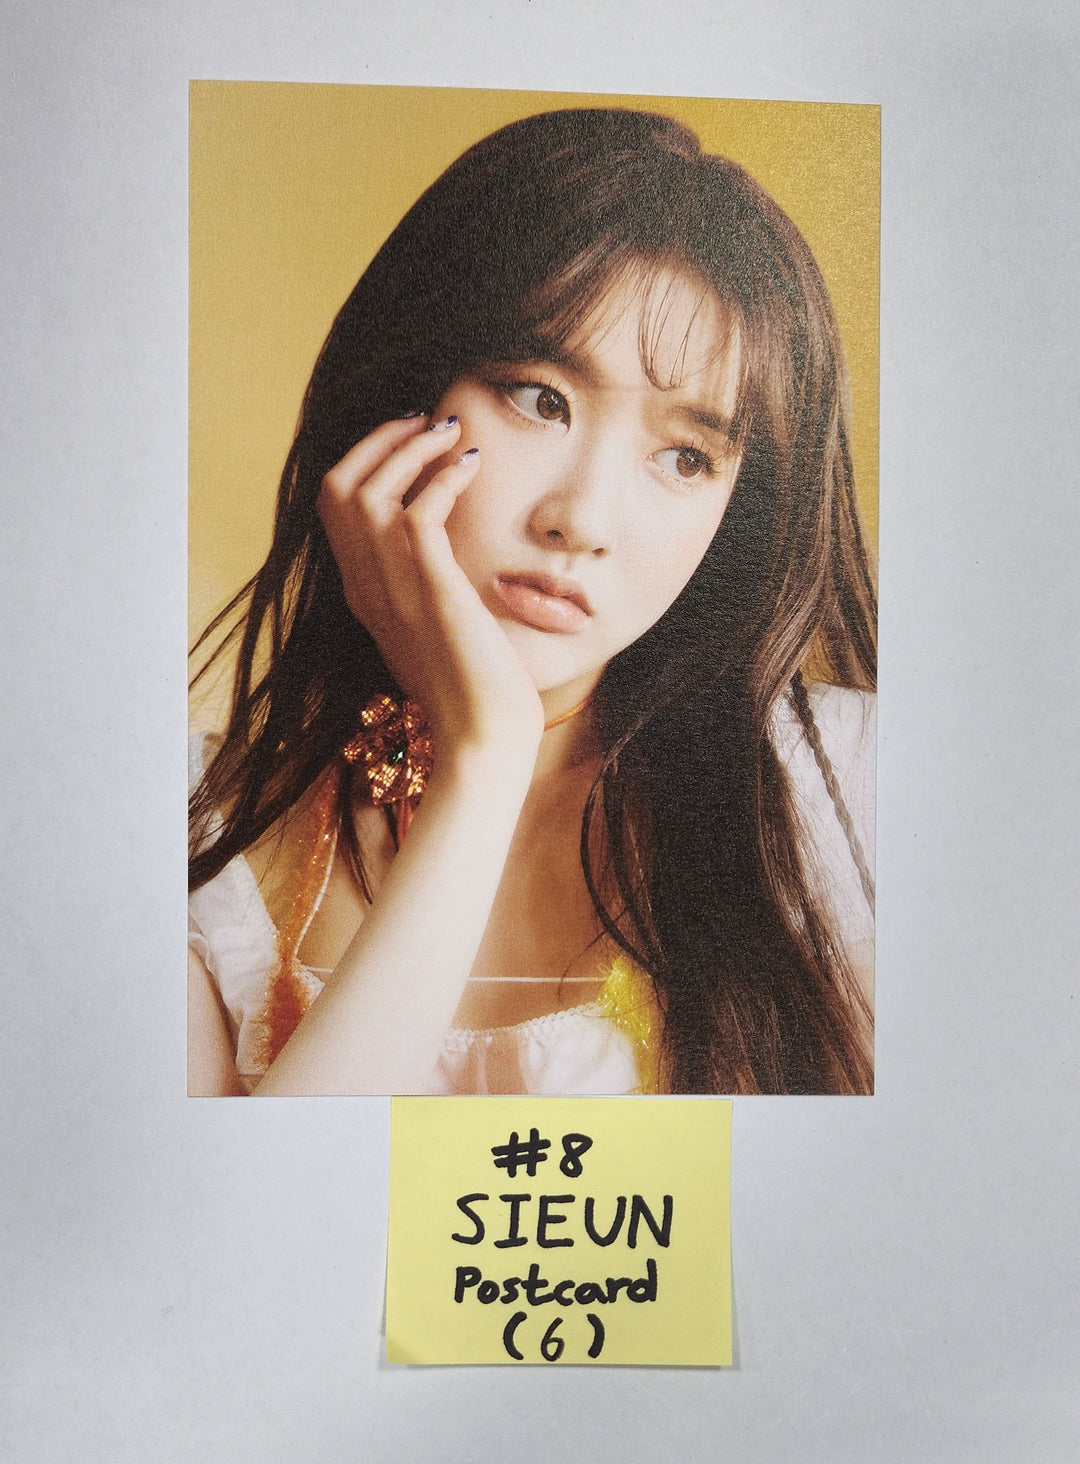 StayC 'WE NEED LOVE' - Everline Fansign Event Photocard, Postcard Round 2